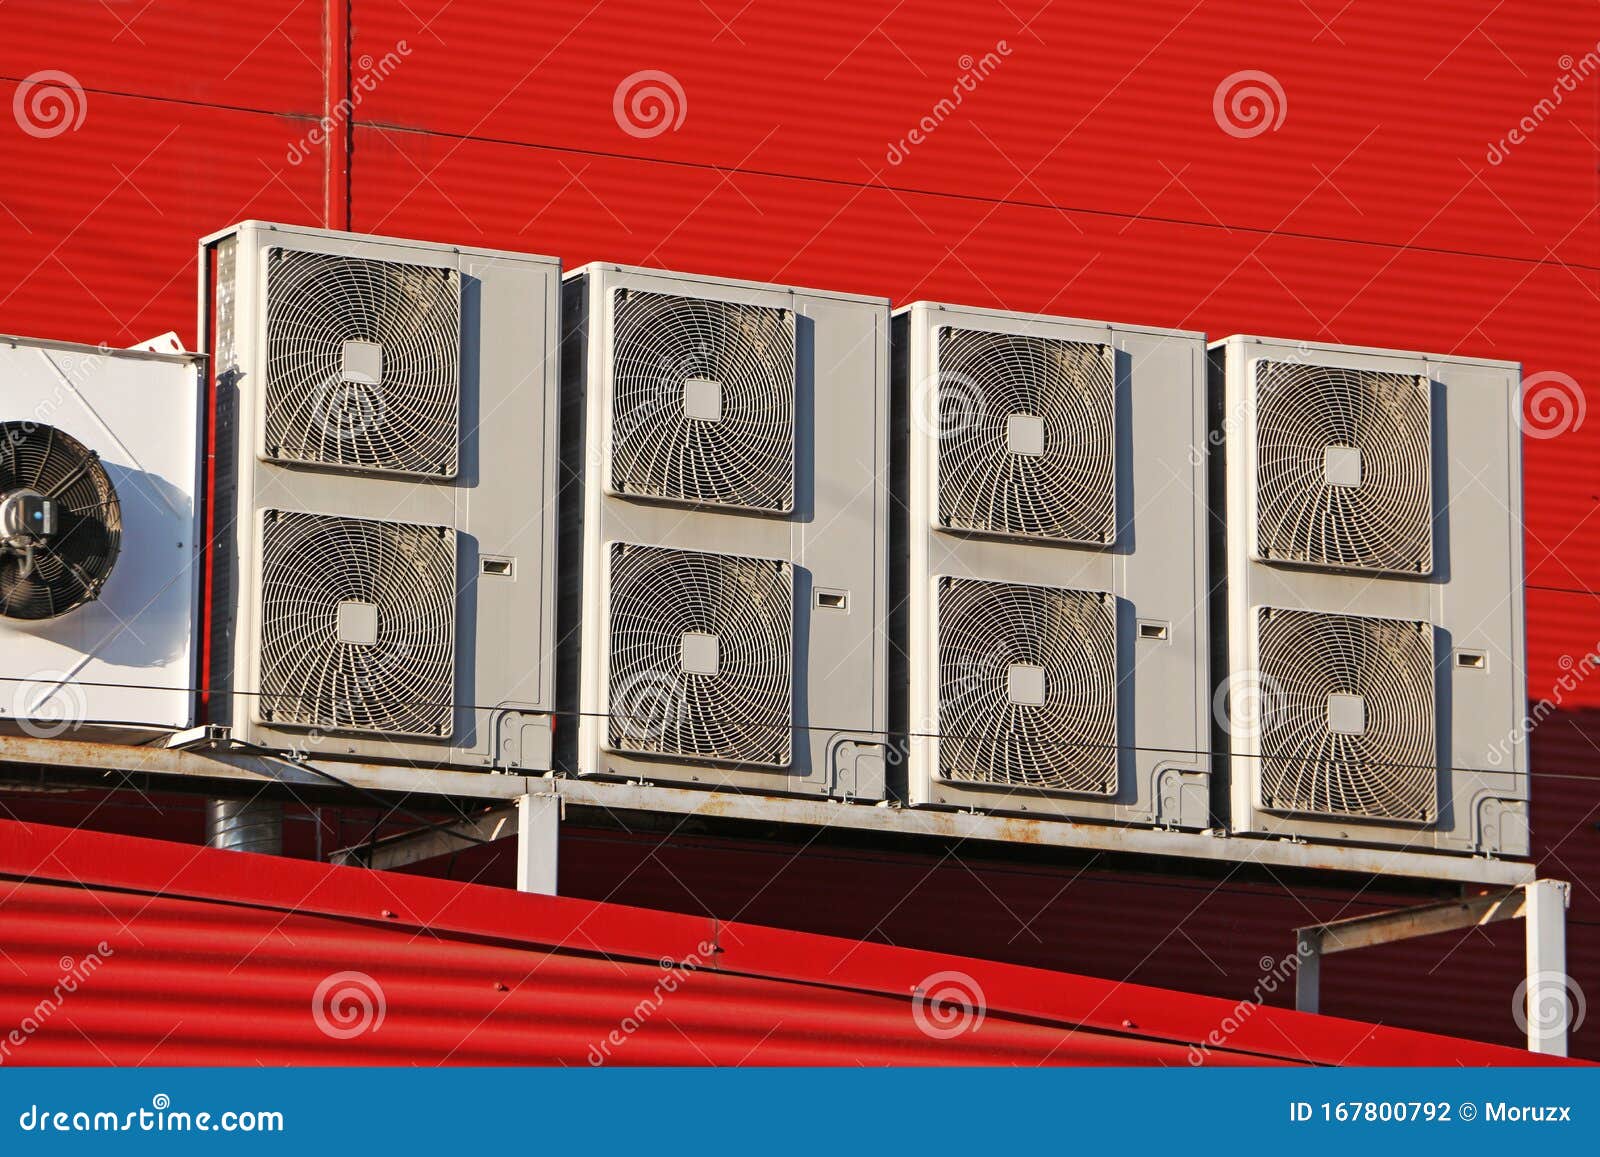 air conditioner devices on red wall - supermarket air conditioner